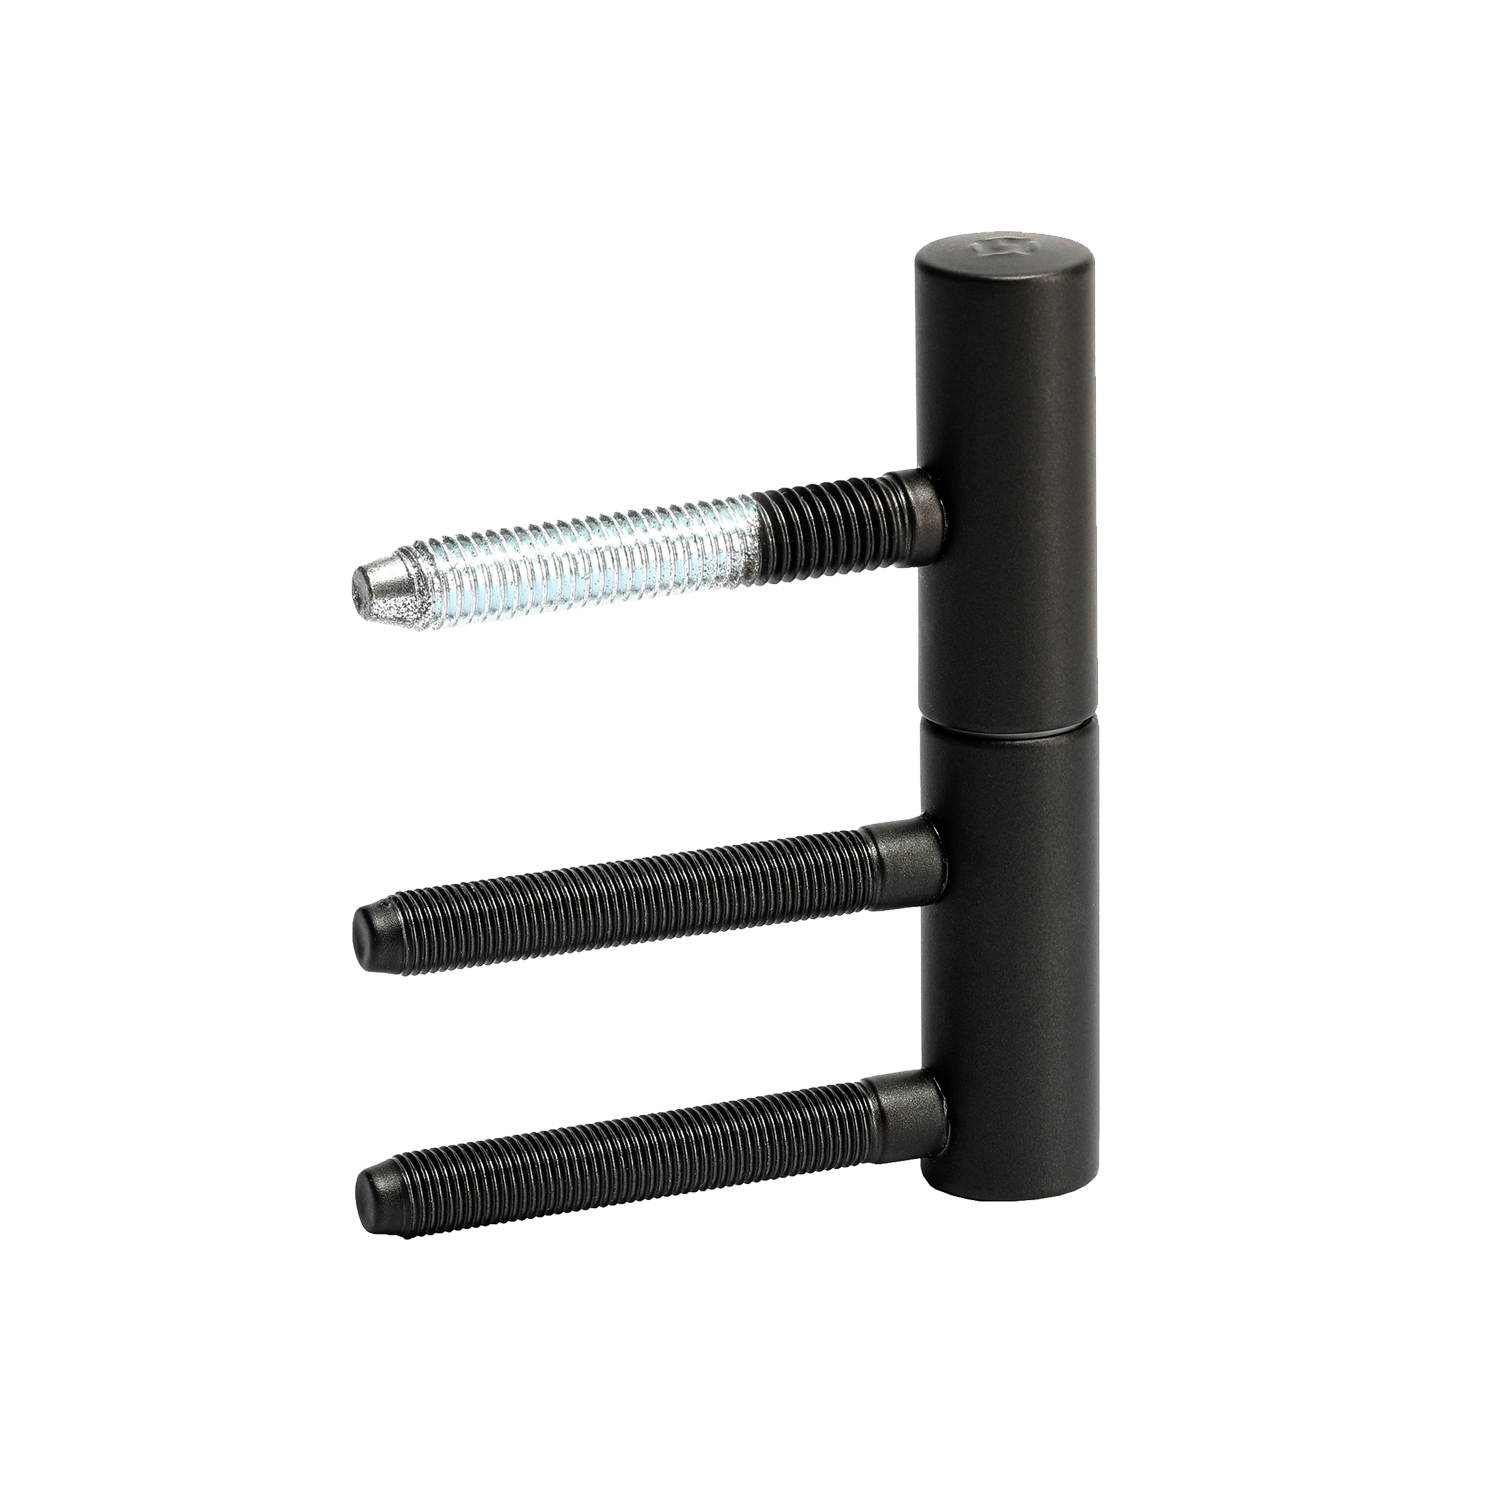 2-part wooden door hinge in the surface graphite black, in the isolated view